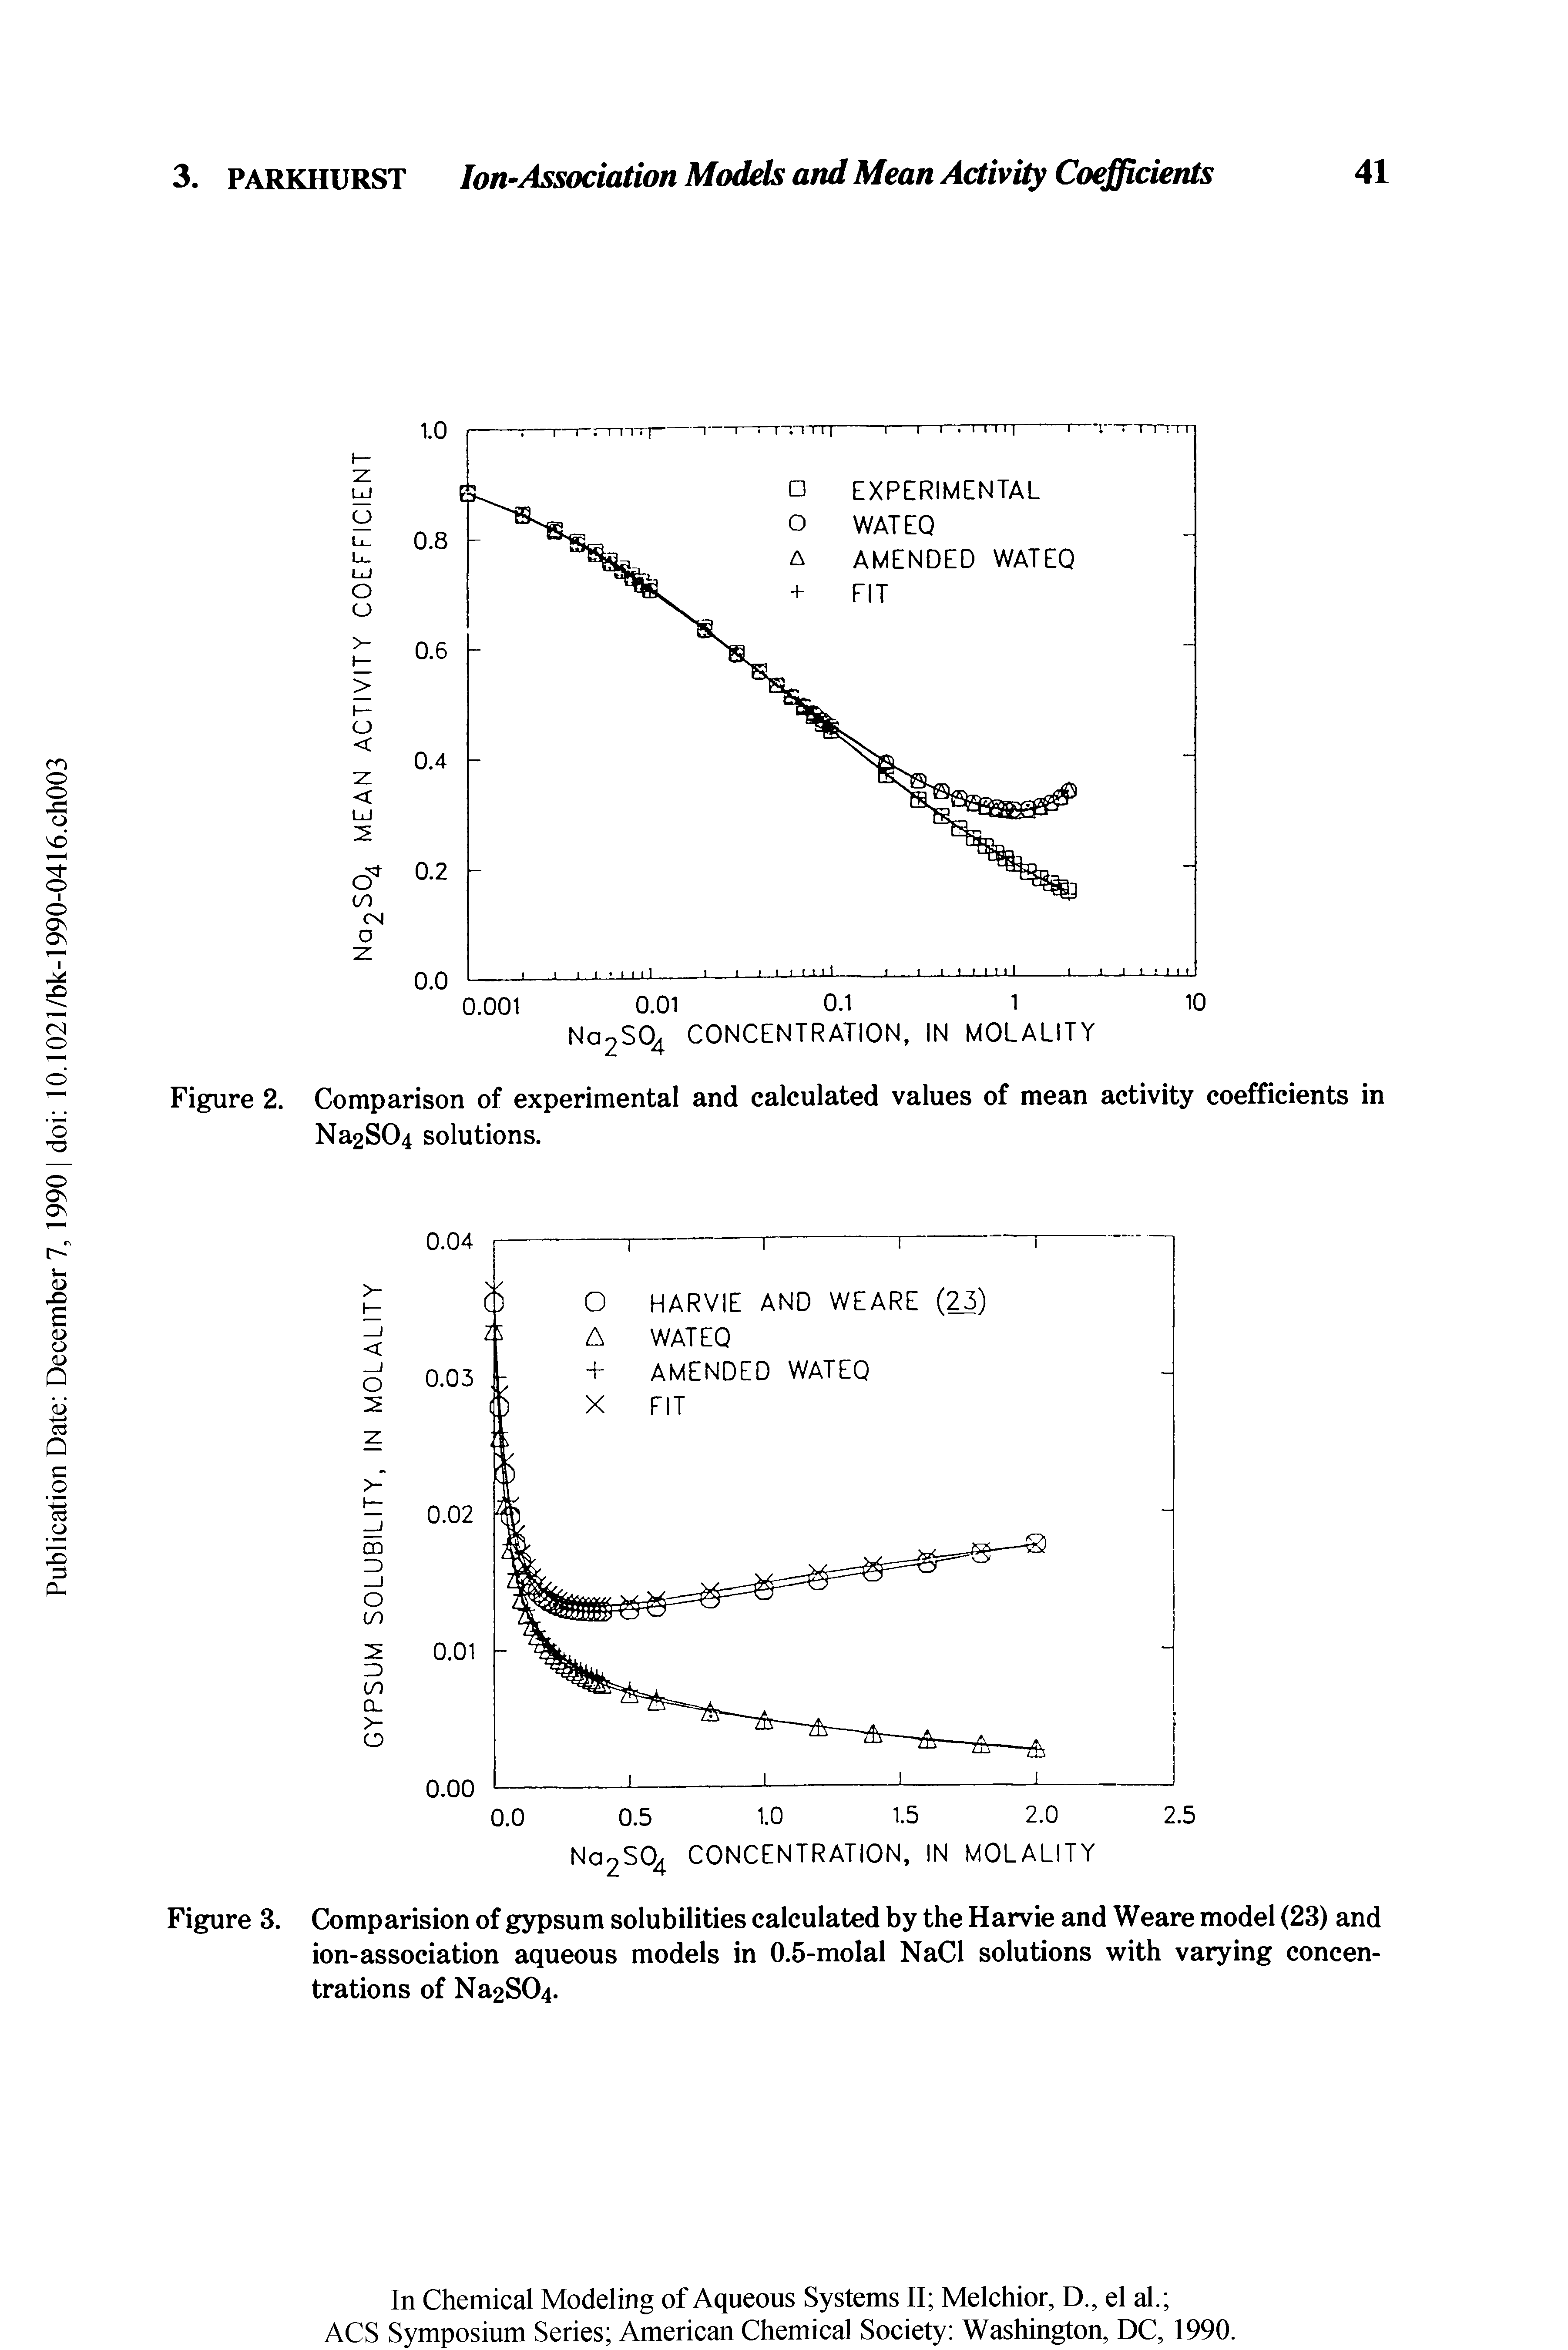 Figure 3. Comparision of gypsum solubilities calculated by the Harvie and Weare model (23) and ion-association aqueous models in 0.5-molal NaCl solutions with varying concentrations of Na2S04.